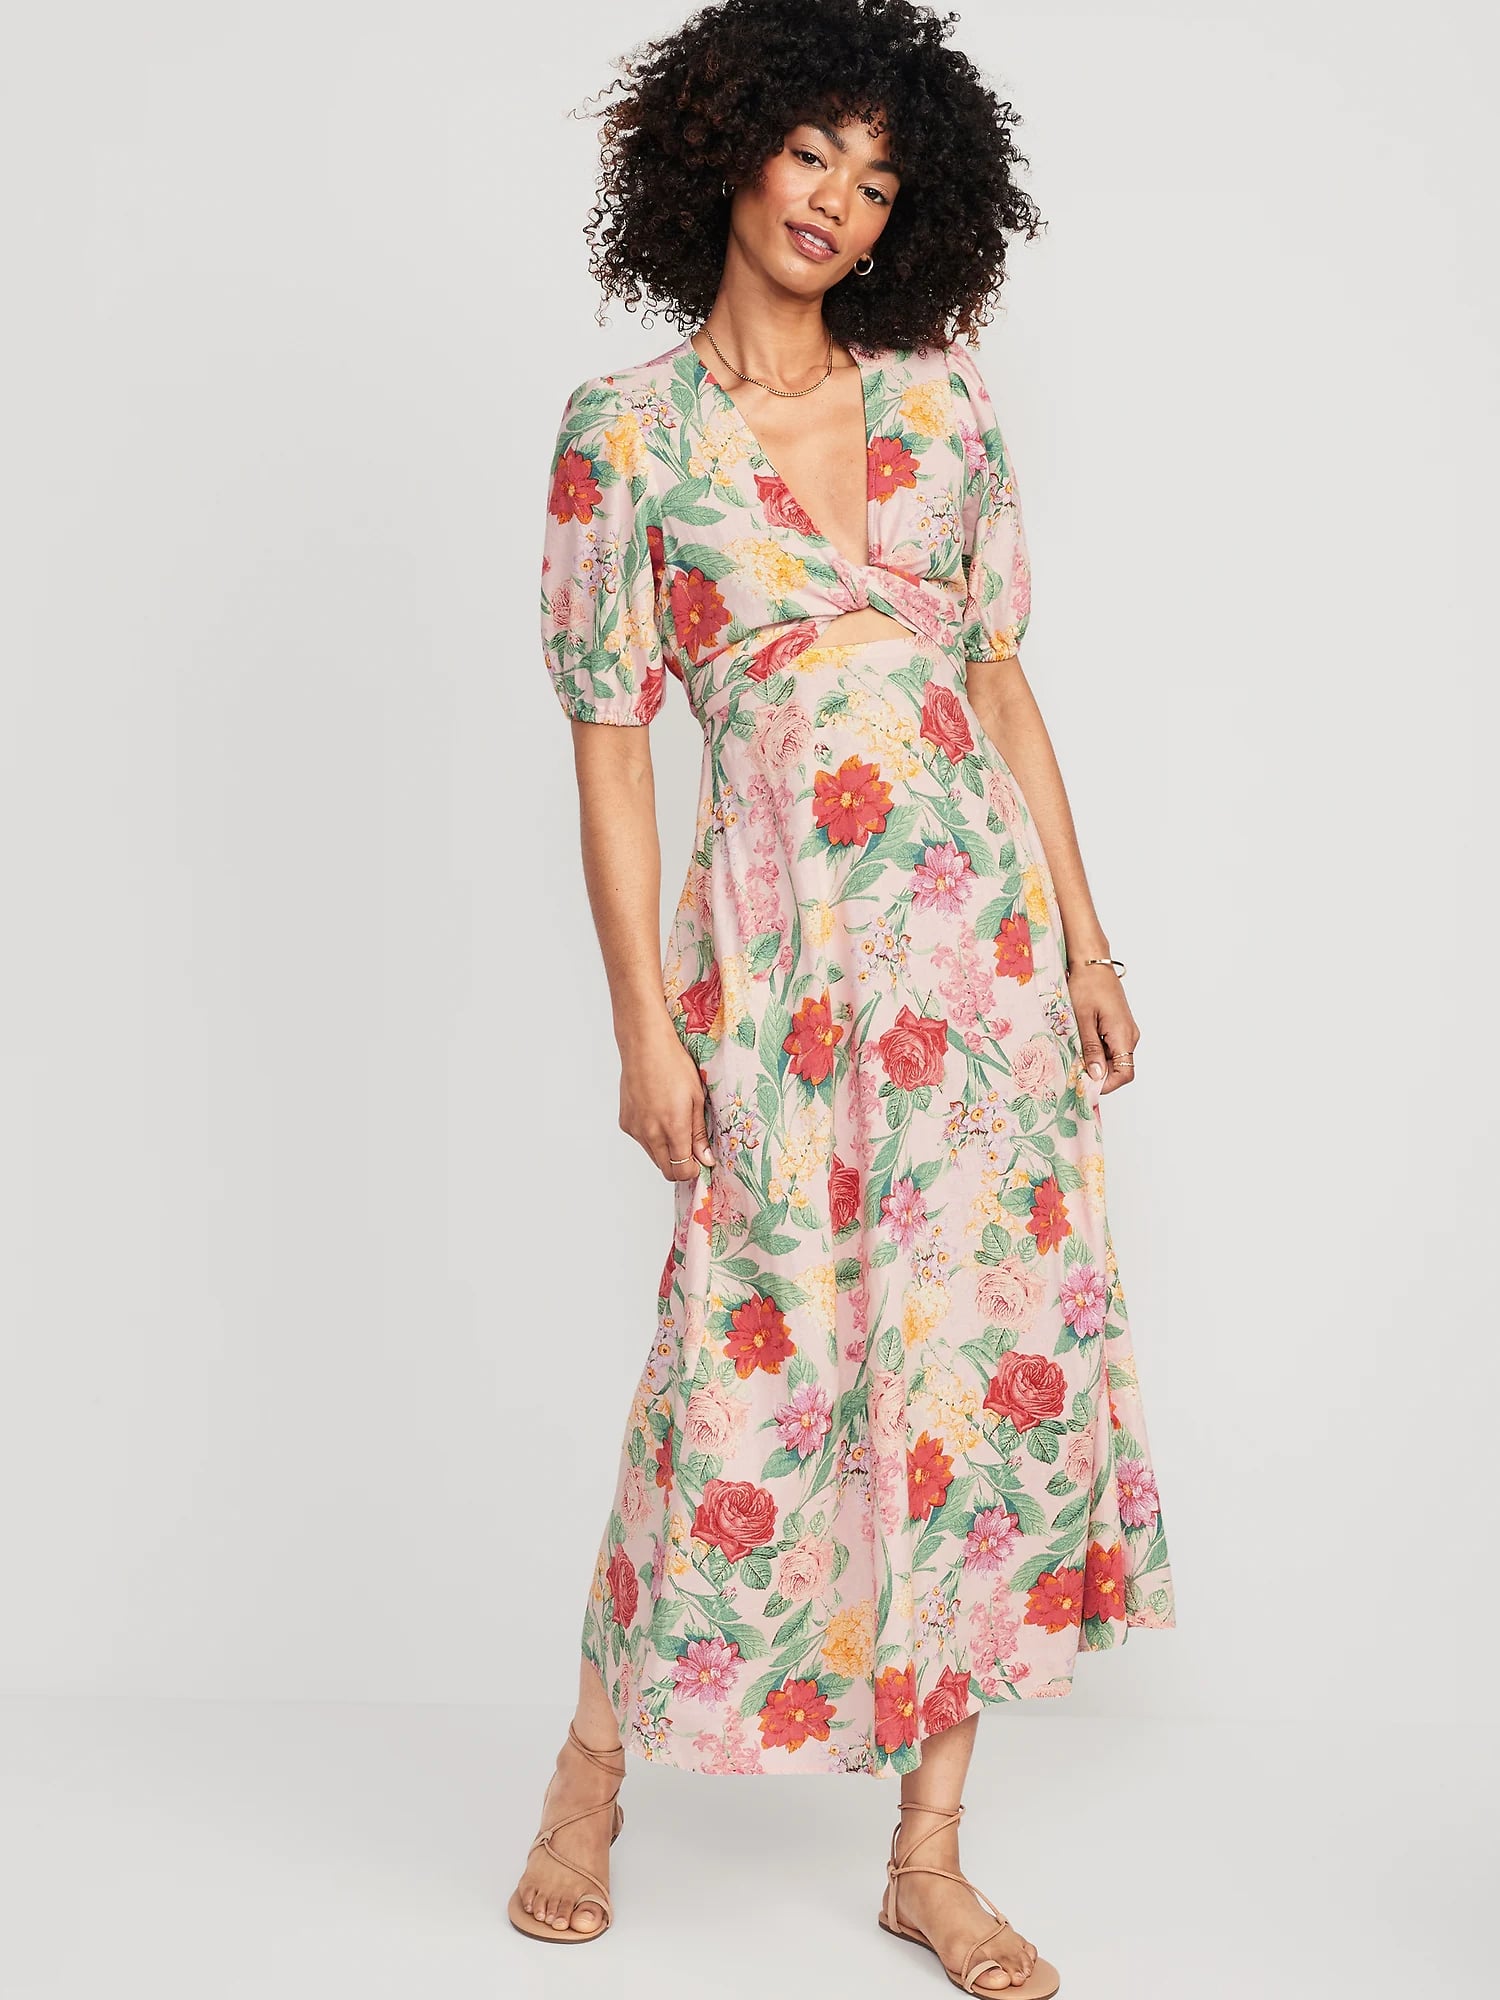 The Best Spring Maxi Dresses 2023